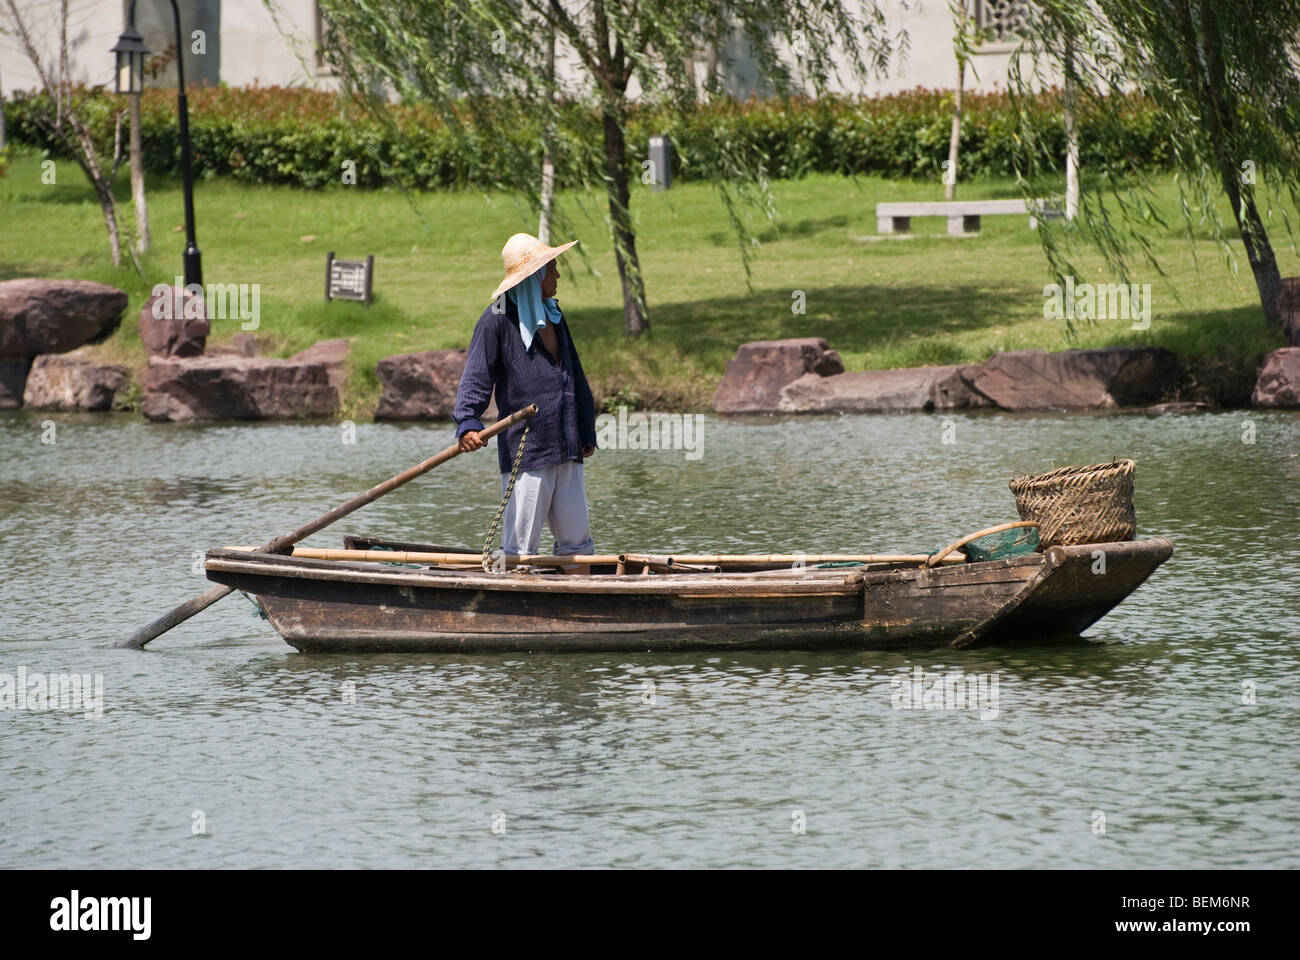 Man in a ancient wooden boat in a river of Xitang Xitang is an ancient scenic town in Jiashan County, Zhejiang Province, China. Stock Photo